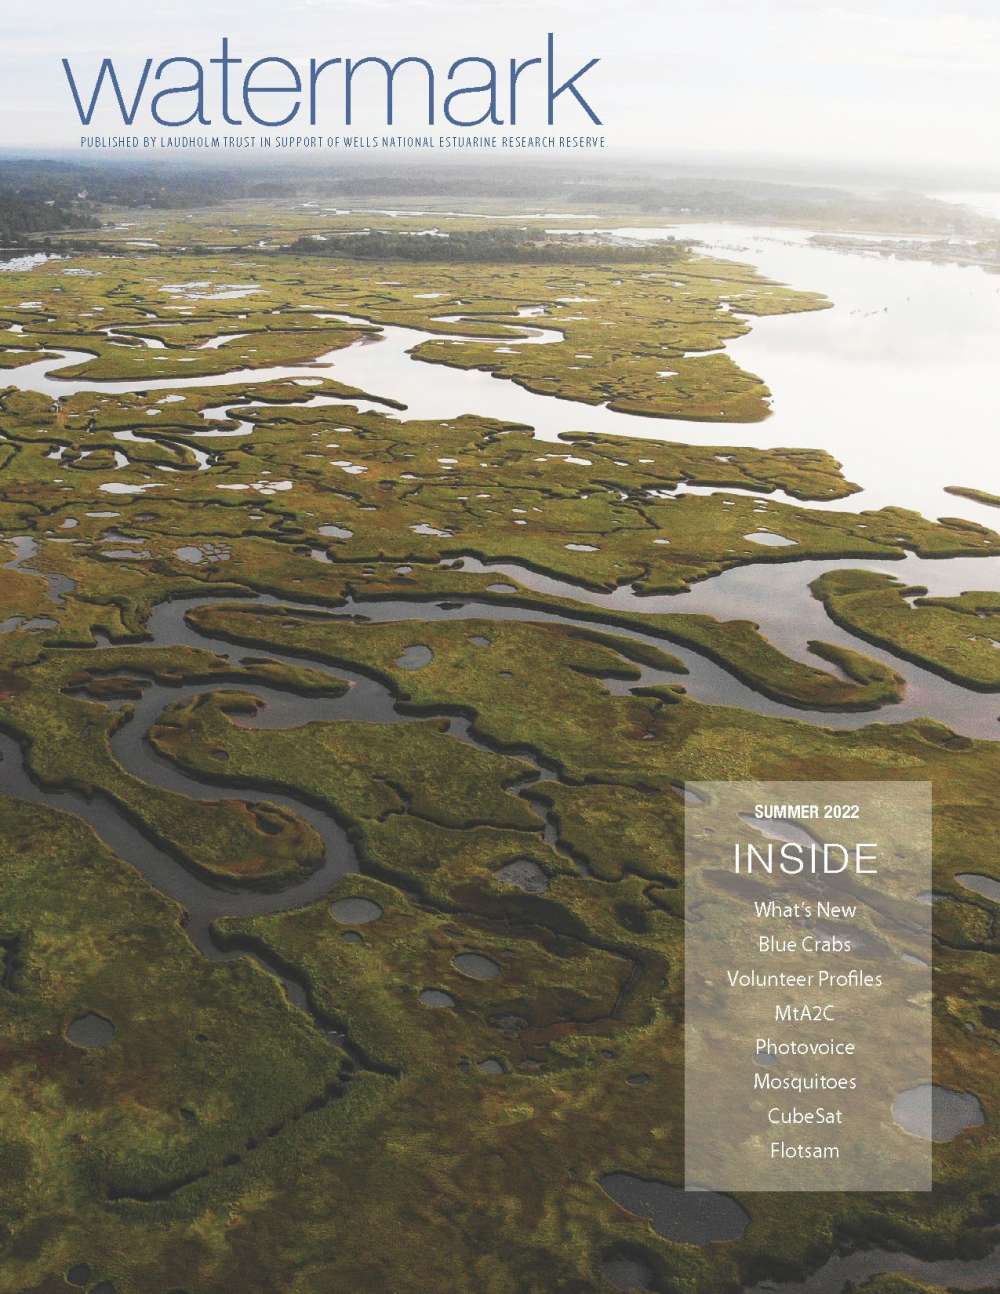 Cover of summer 2022 Watermark newsletter with drone photo of Webhannet estuary